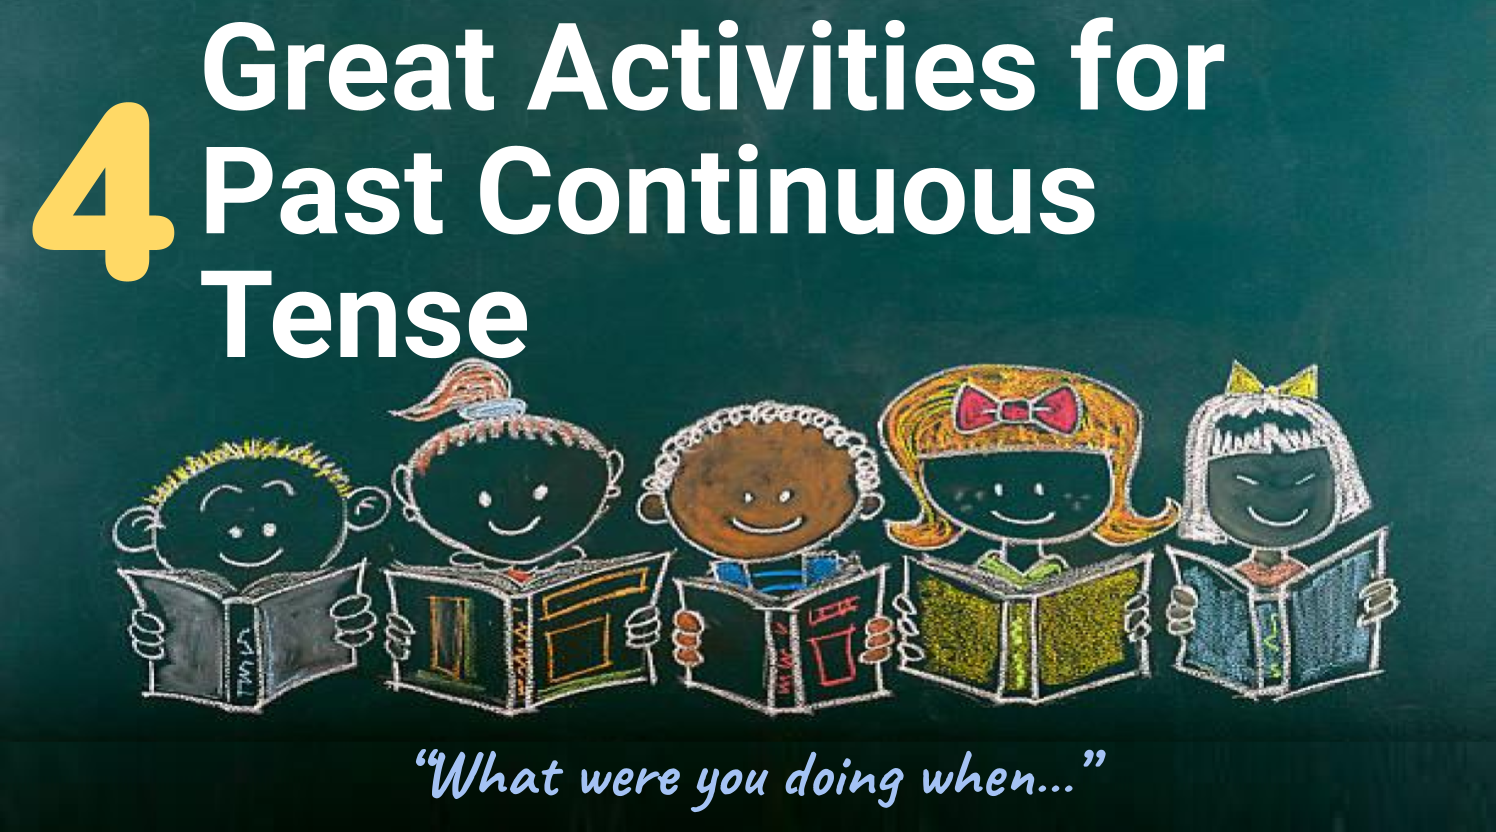 4 Great Activities for Past Continuous Tense